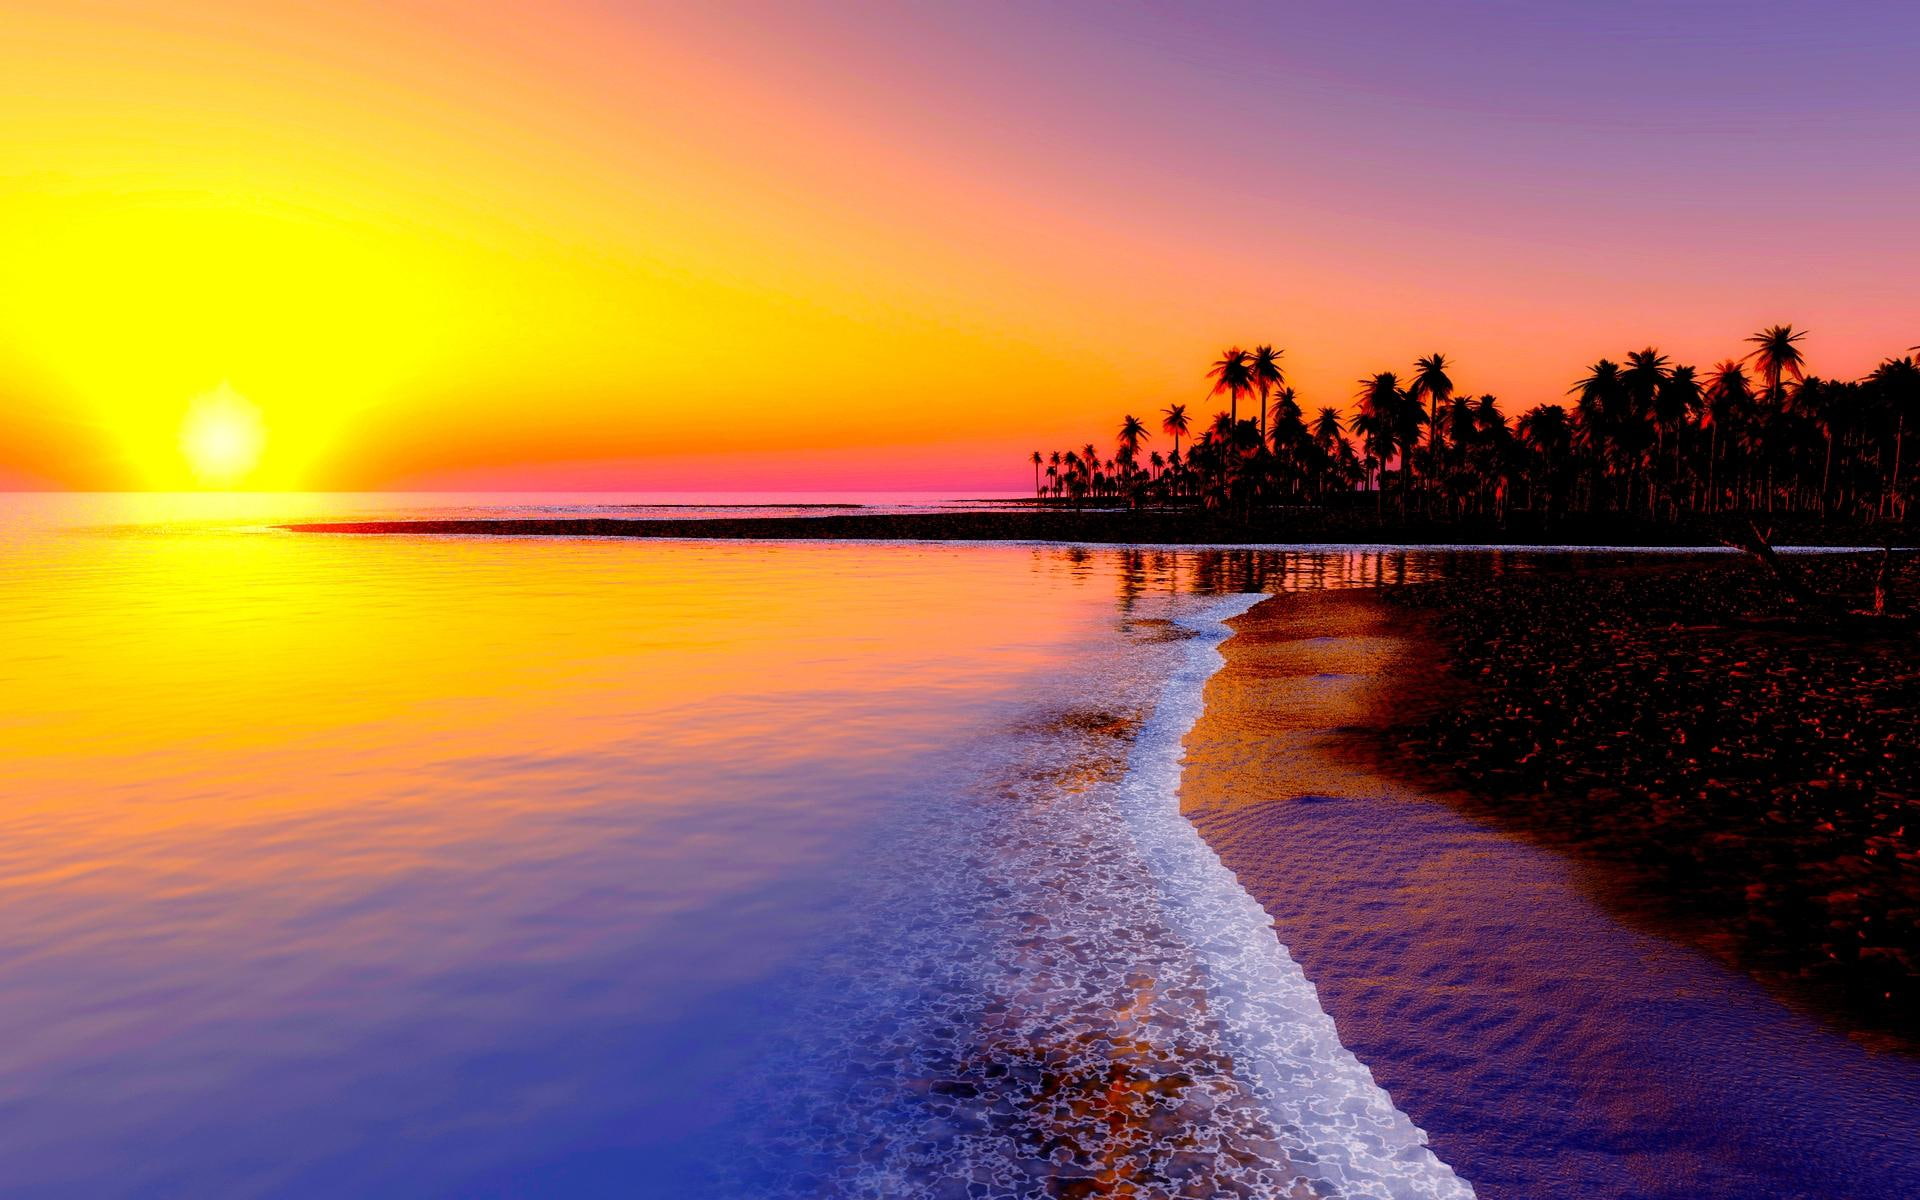 HD wallpaper beach sunset palm trees water sky scenics  nature  beauty in nature  Wallpaper Flare